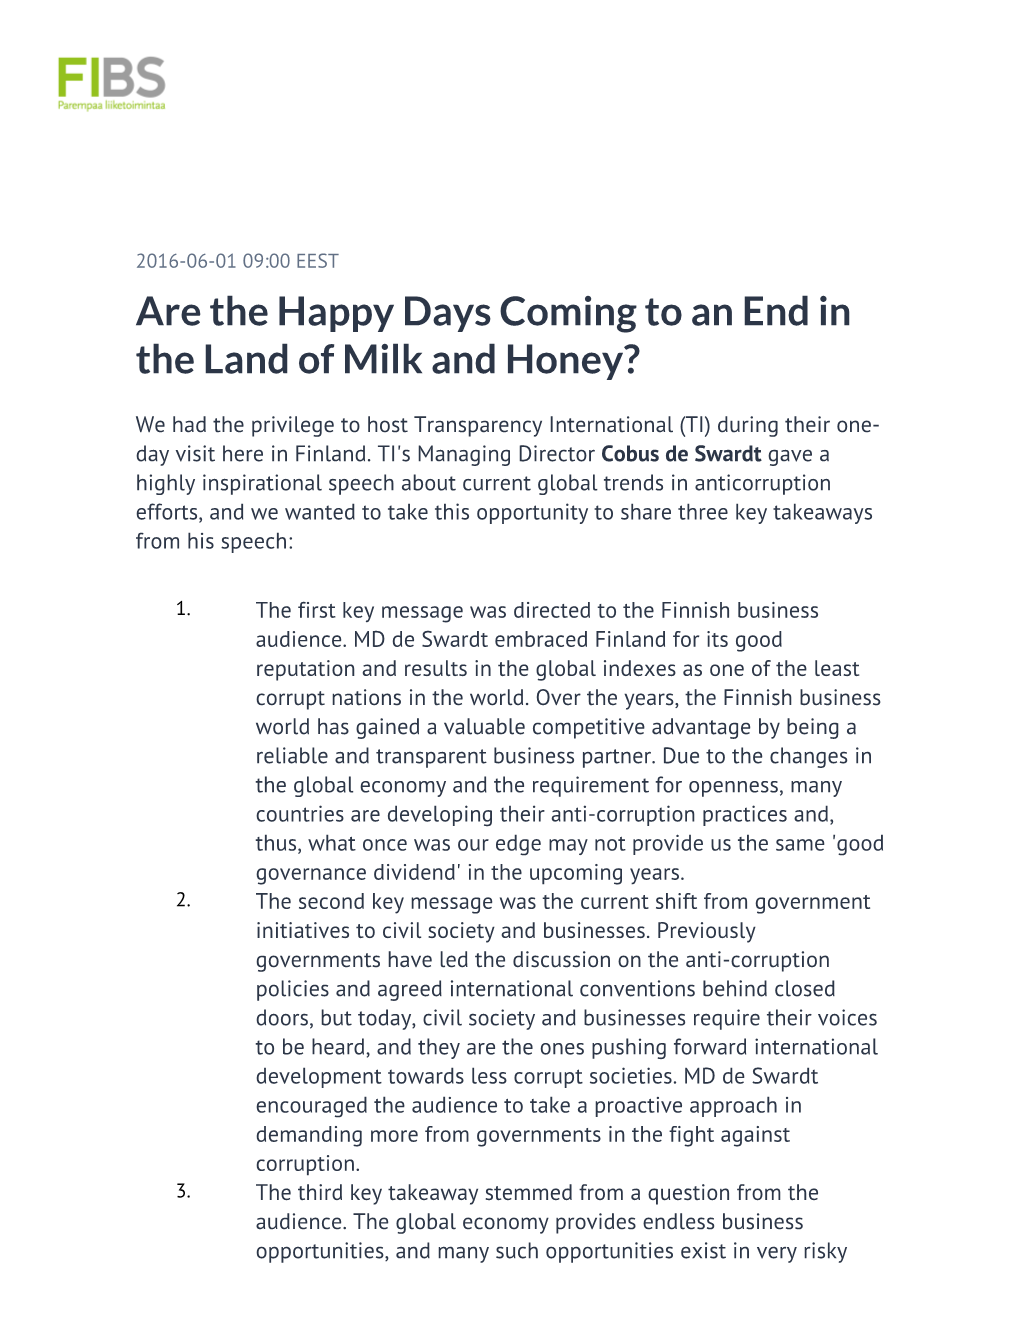 Are the Happy Days Coming to an End in the Land of Milk and Honey?